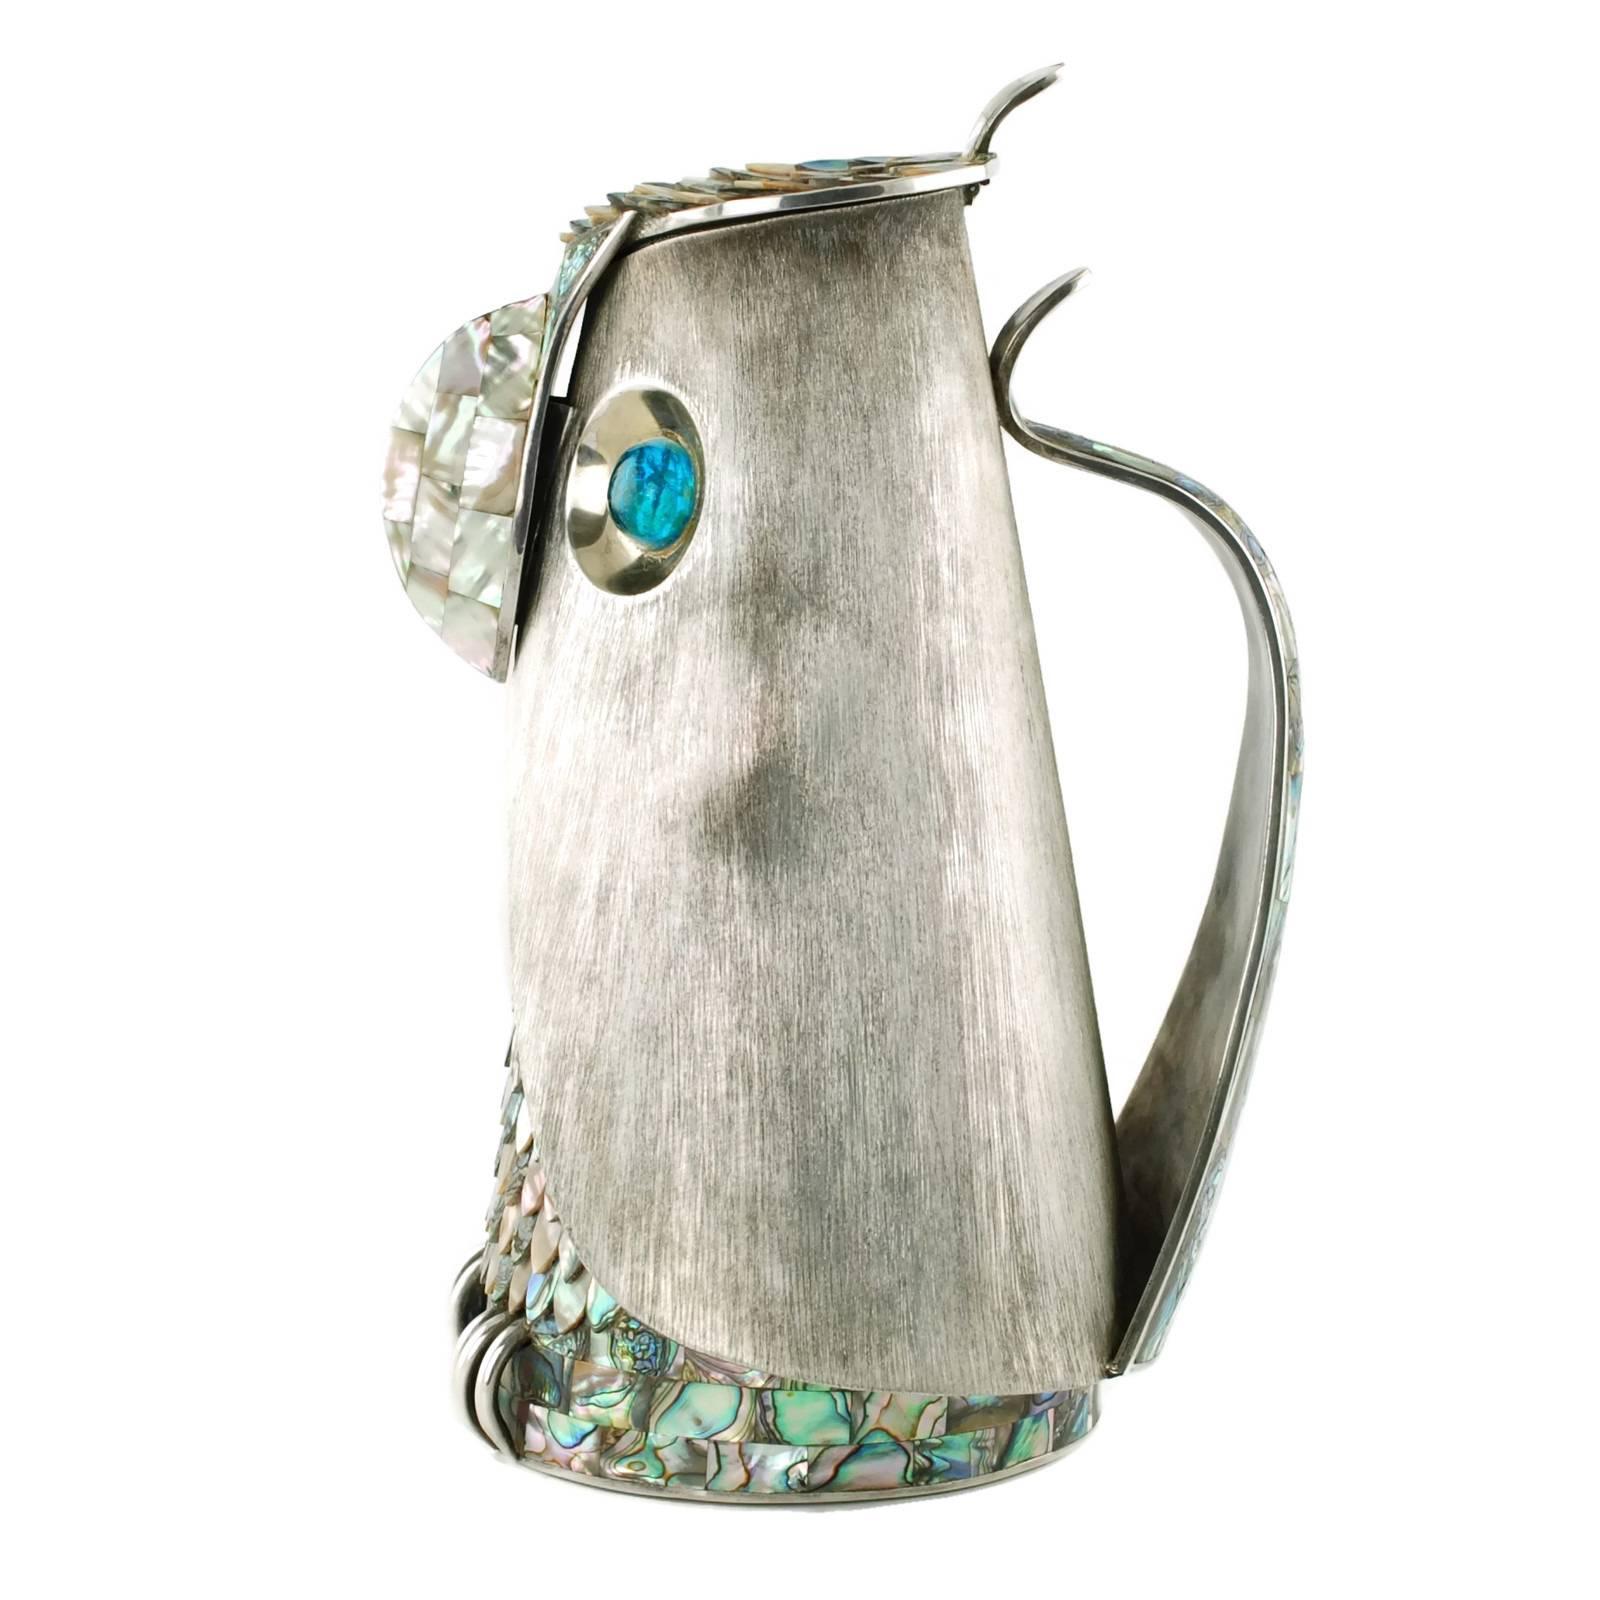 This MCM lidded pitcher was made by highly regarded taller Los Castillo of Mexico. The piece has been made in the form of a stylized owl and features a brushed silver plate exterior along with abalone accents in the form of overlapping feather